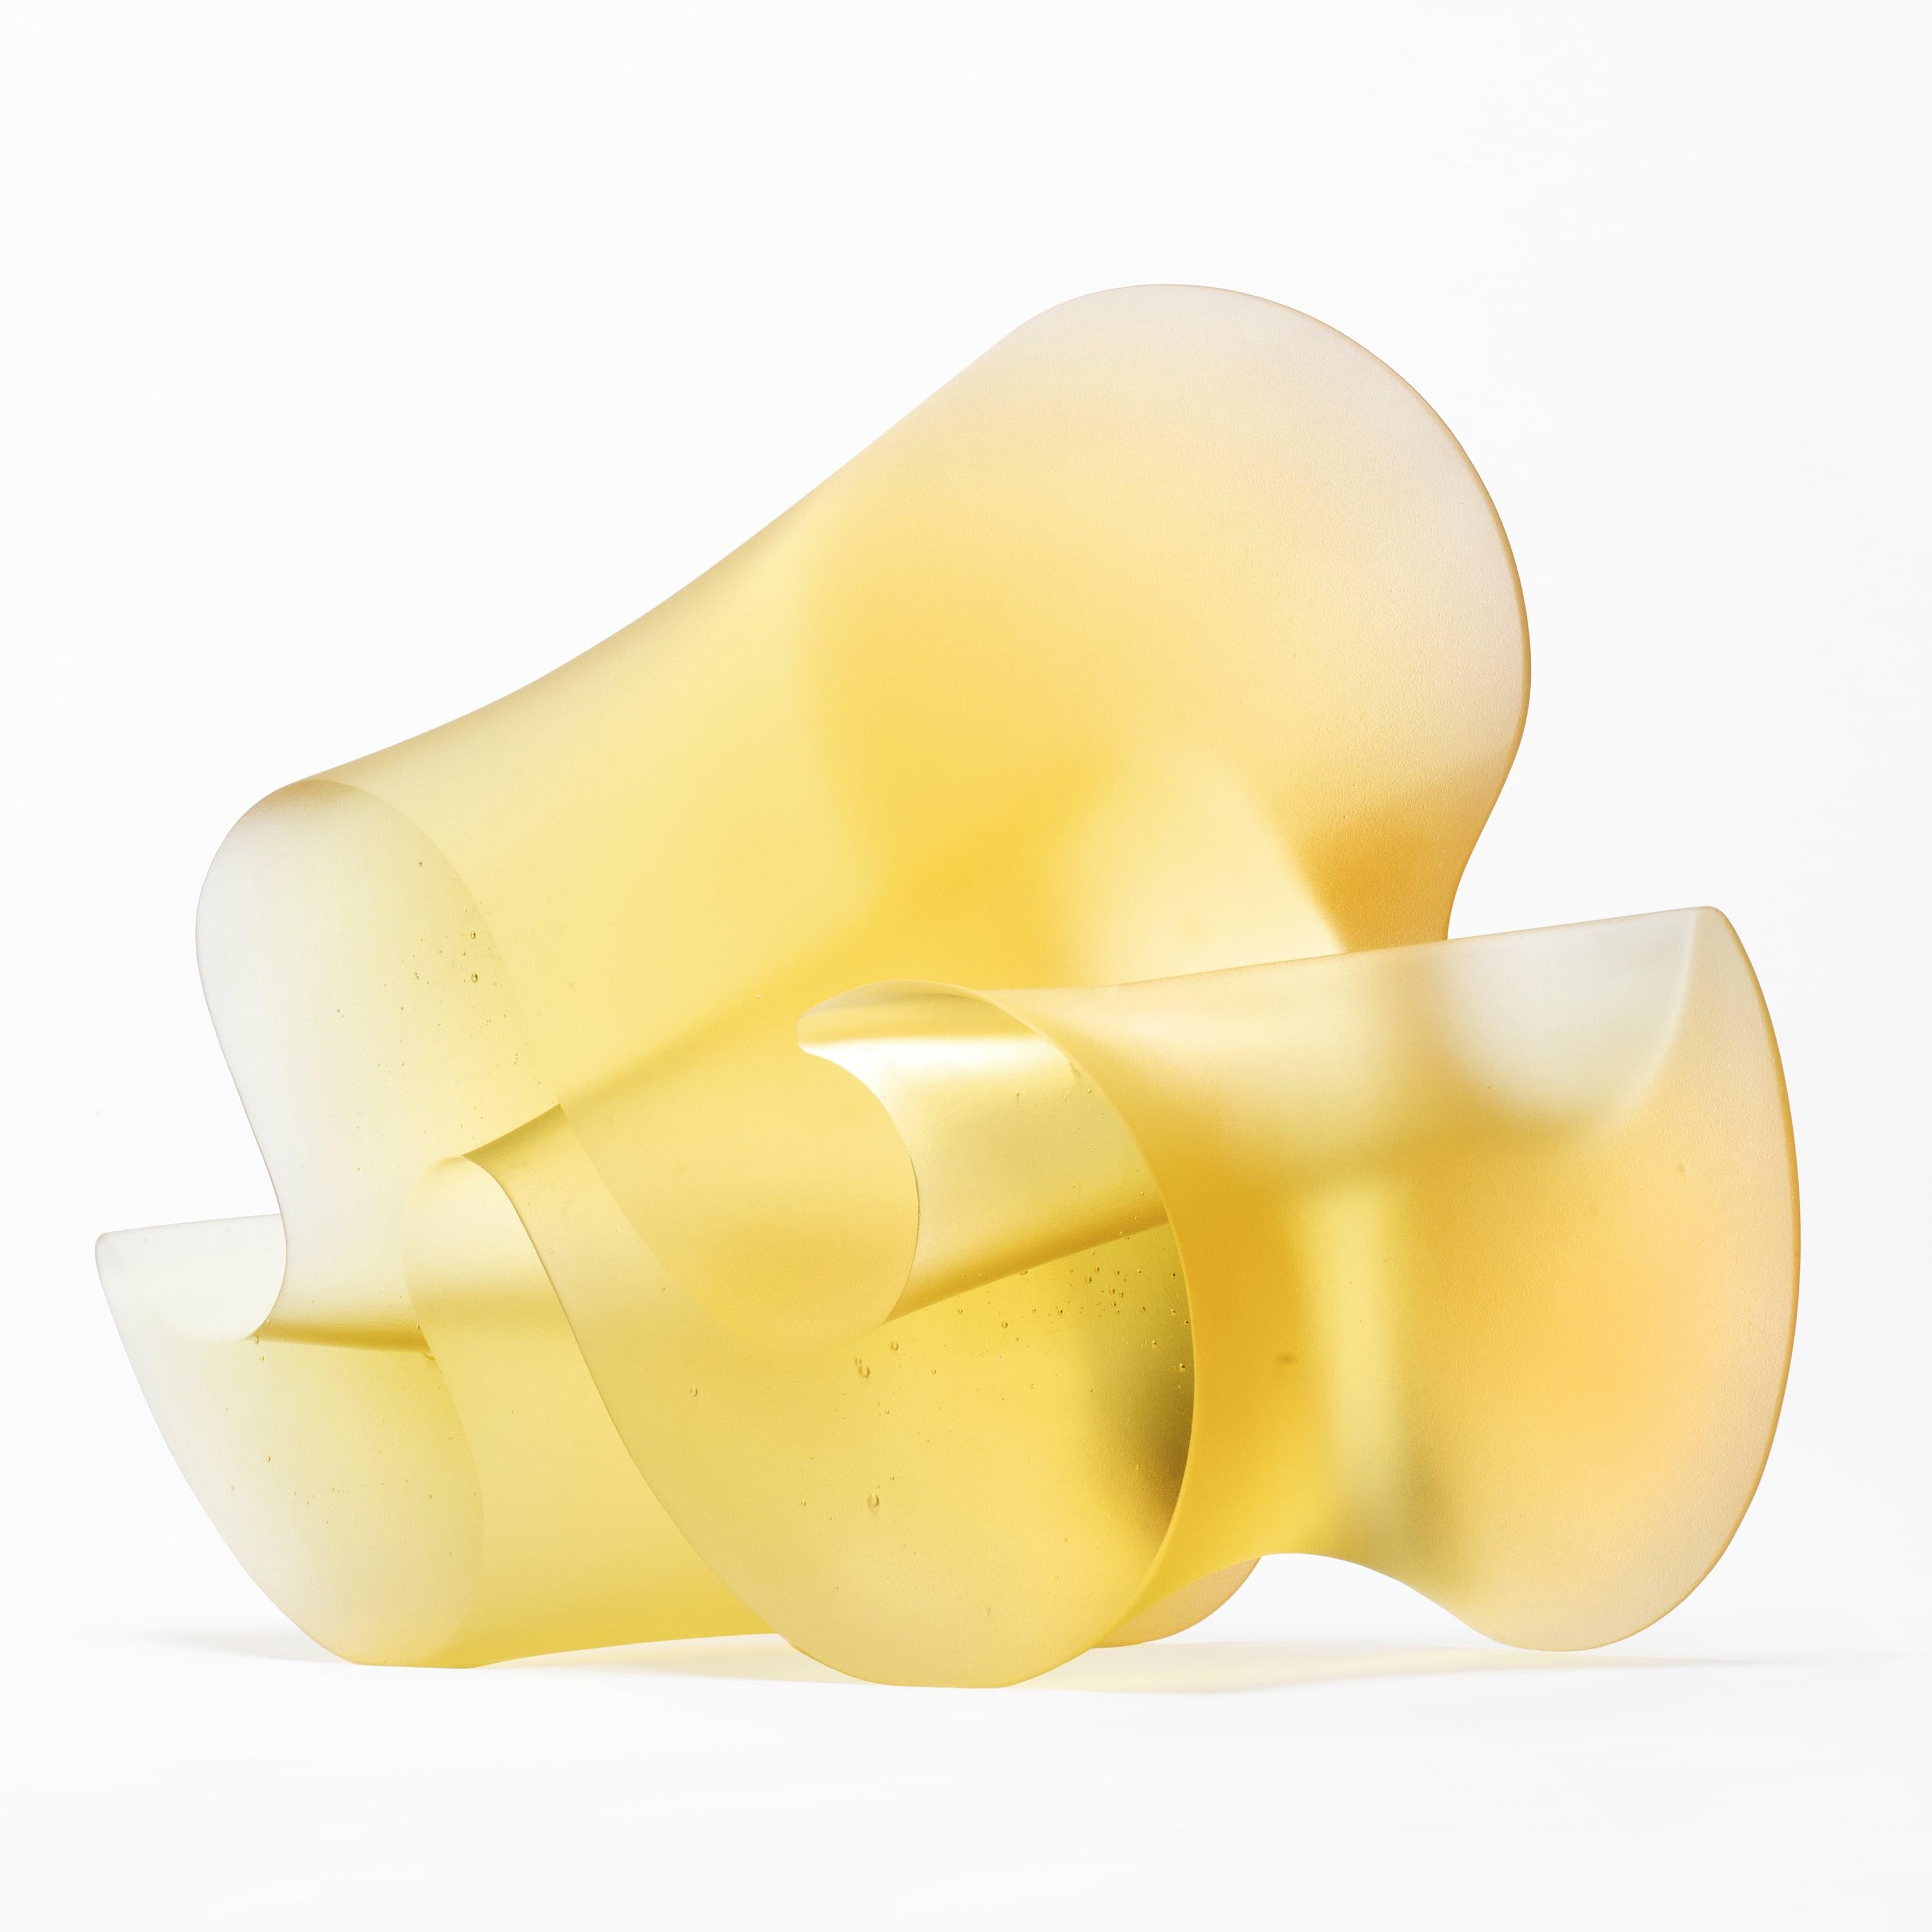 Contemporary Flow Yellow, a Bright Gold / Yellow Solid Cast Glass Sculpture by Karin Mørch For Sale